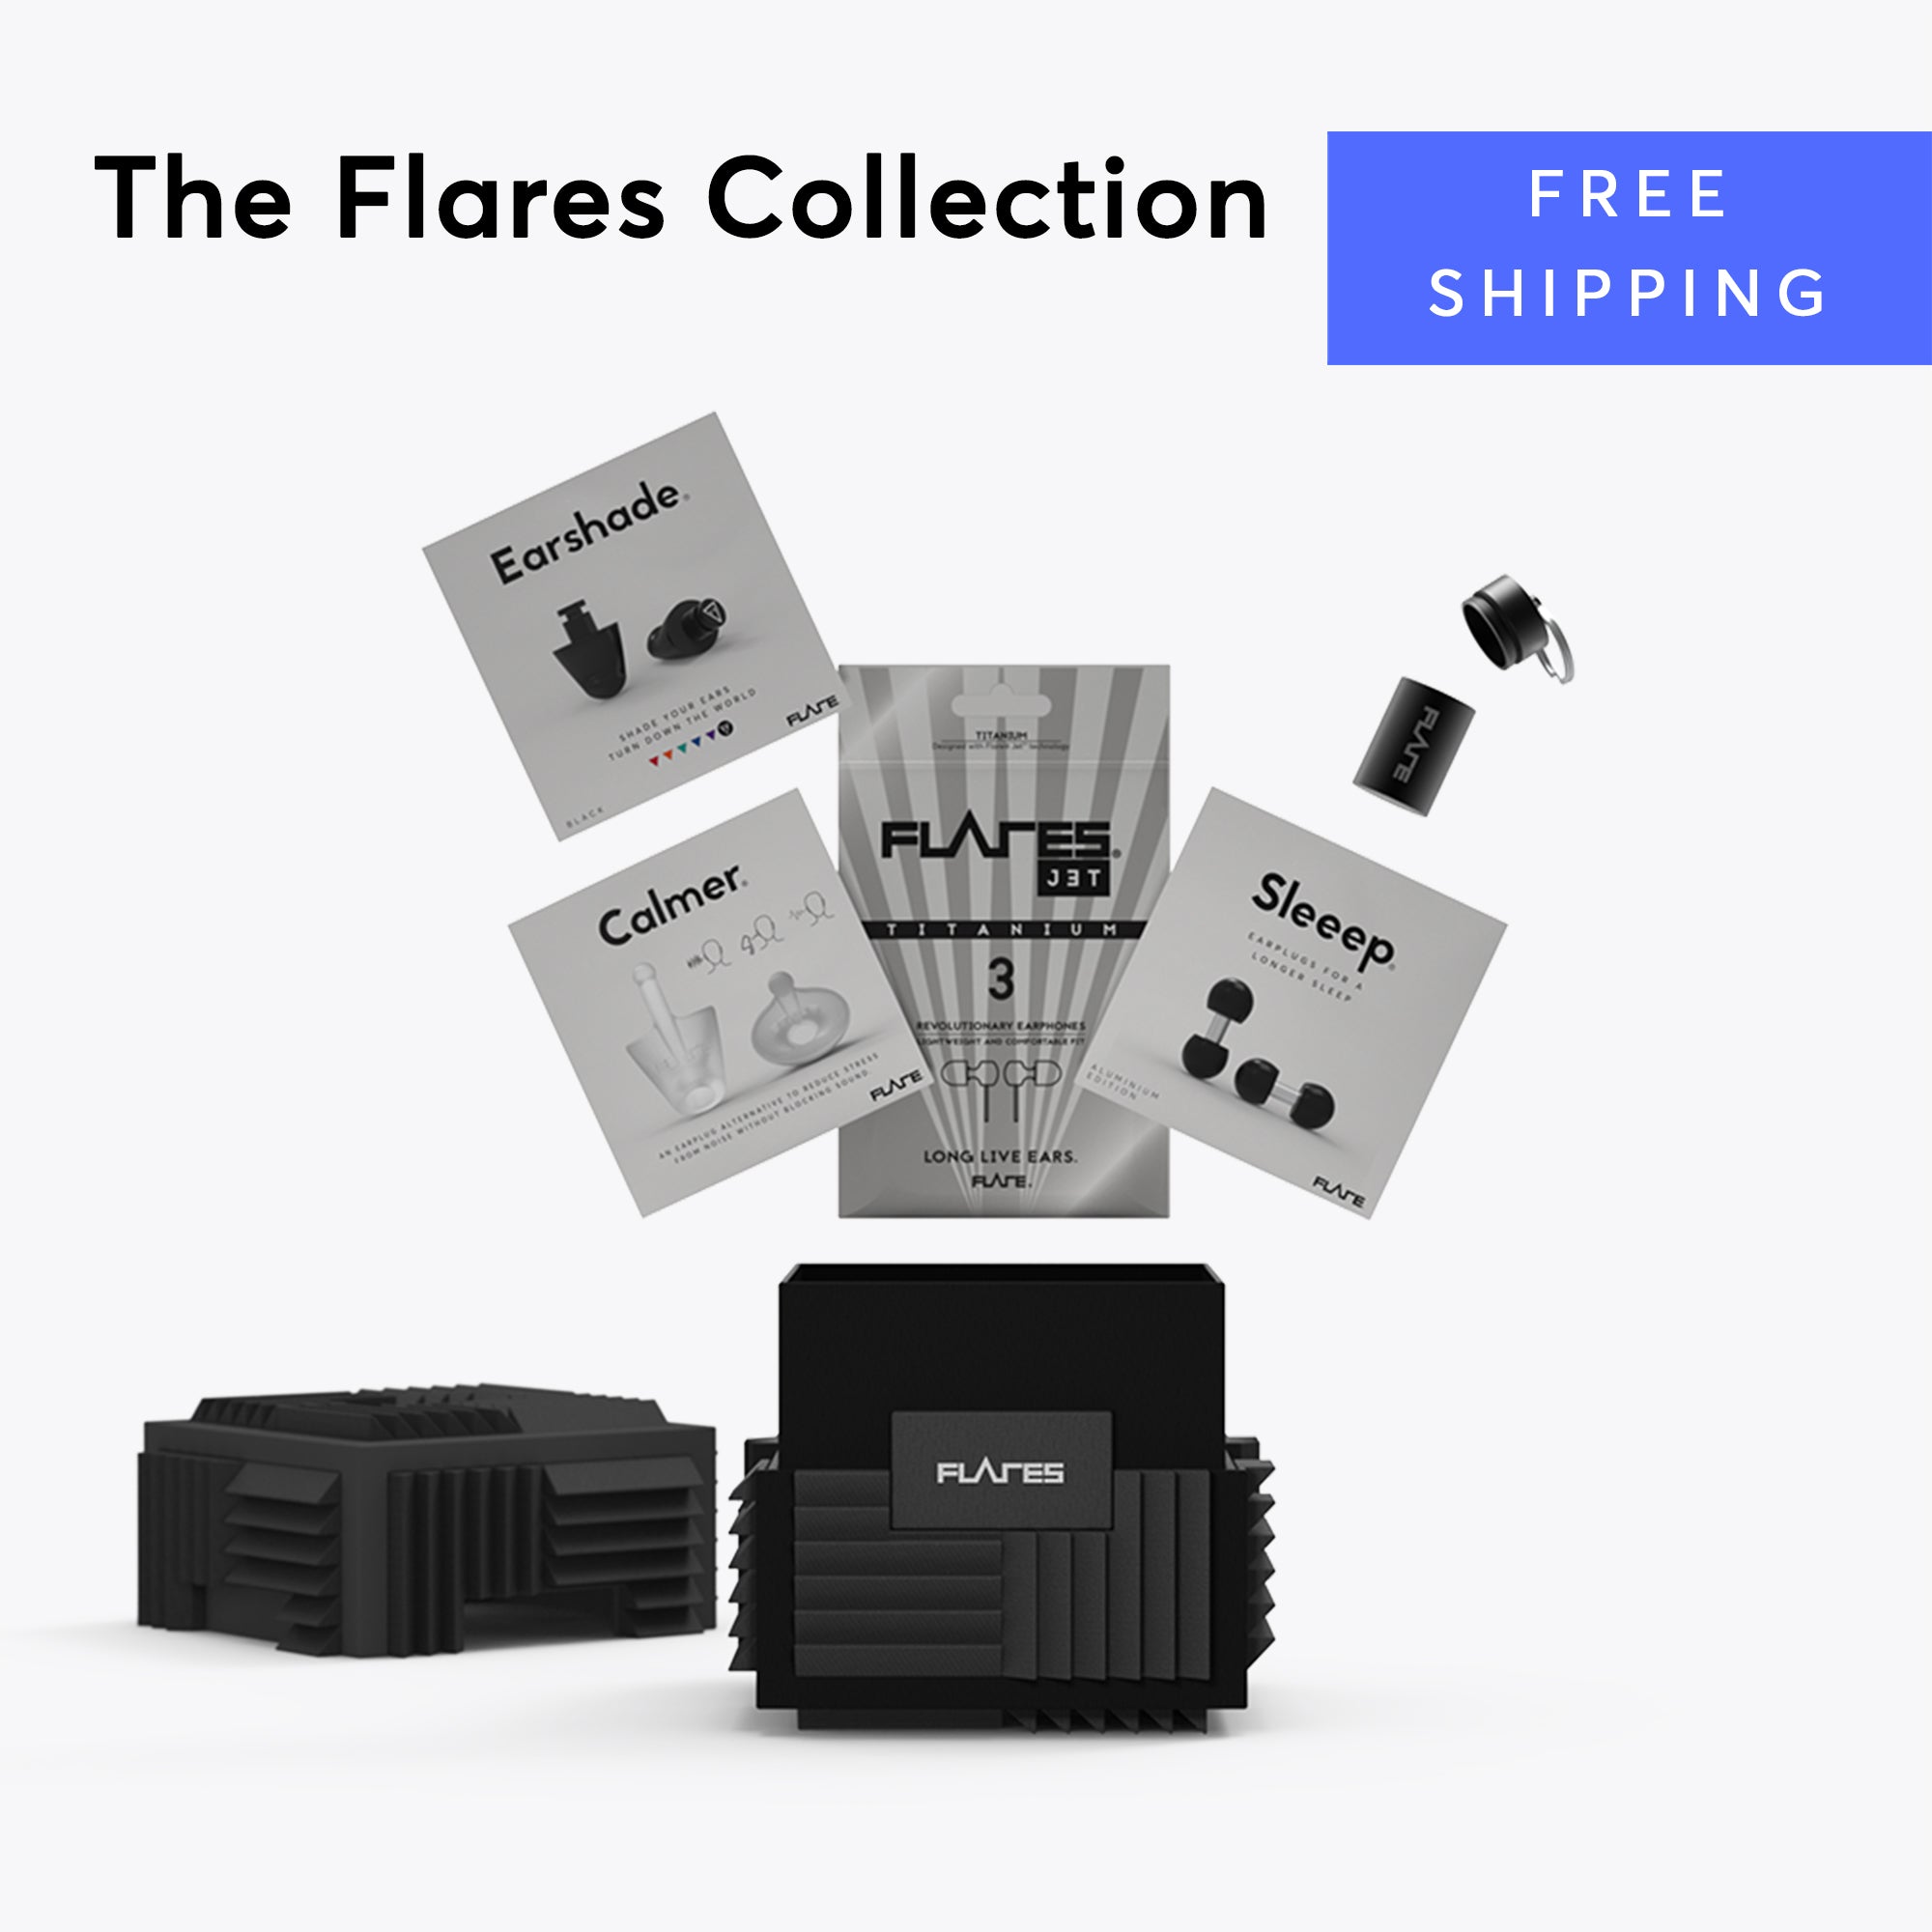 Flare Audio Flares GOLD Wireless Bluetooth Earphones - Free Shipping!